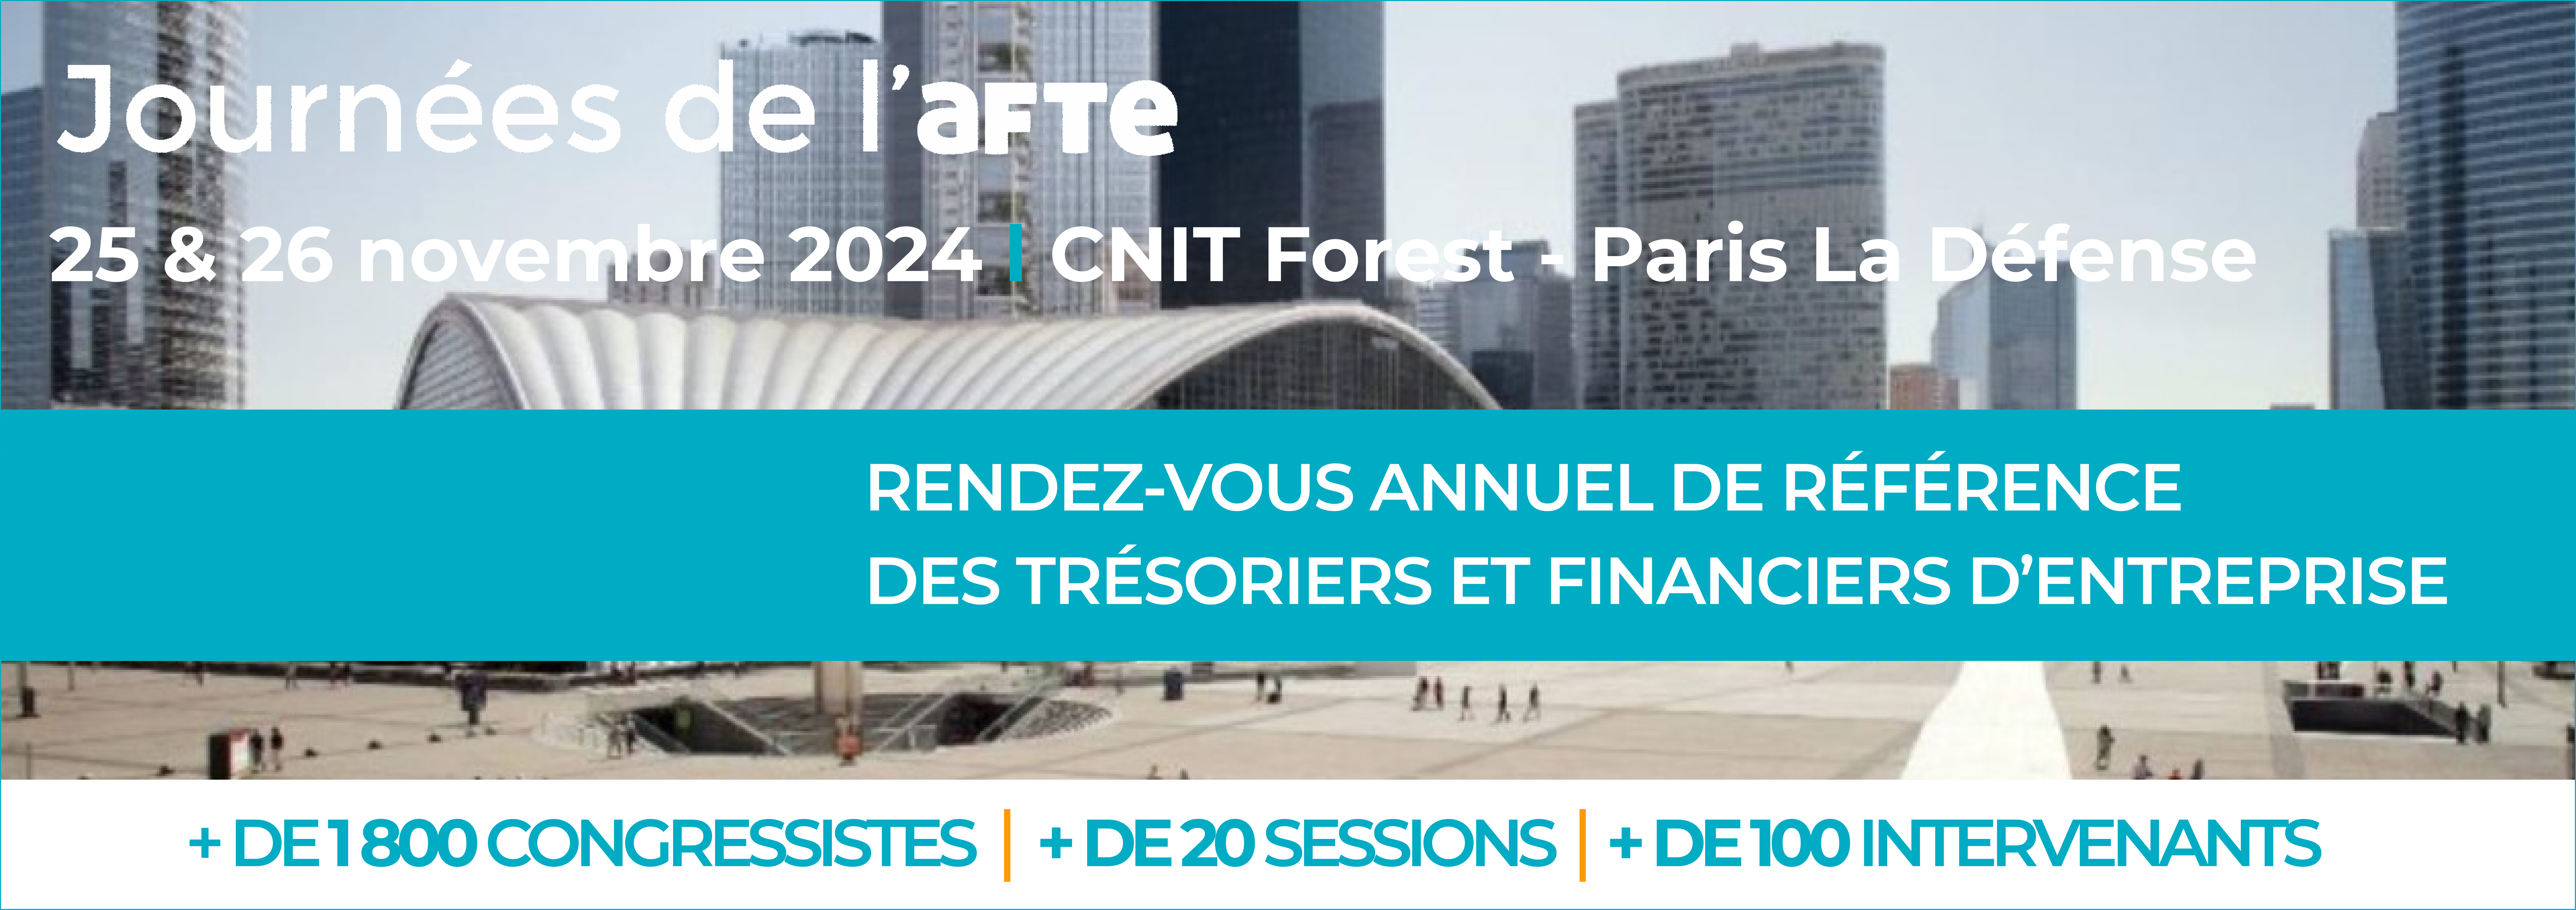 Save the date JA 2024 CNIT Forest